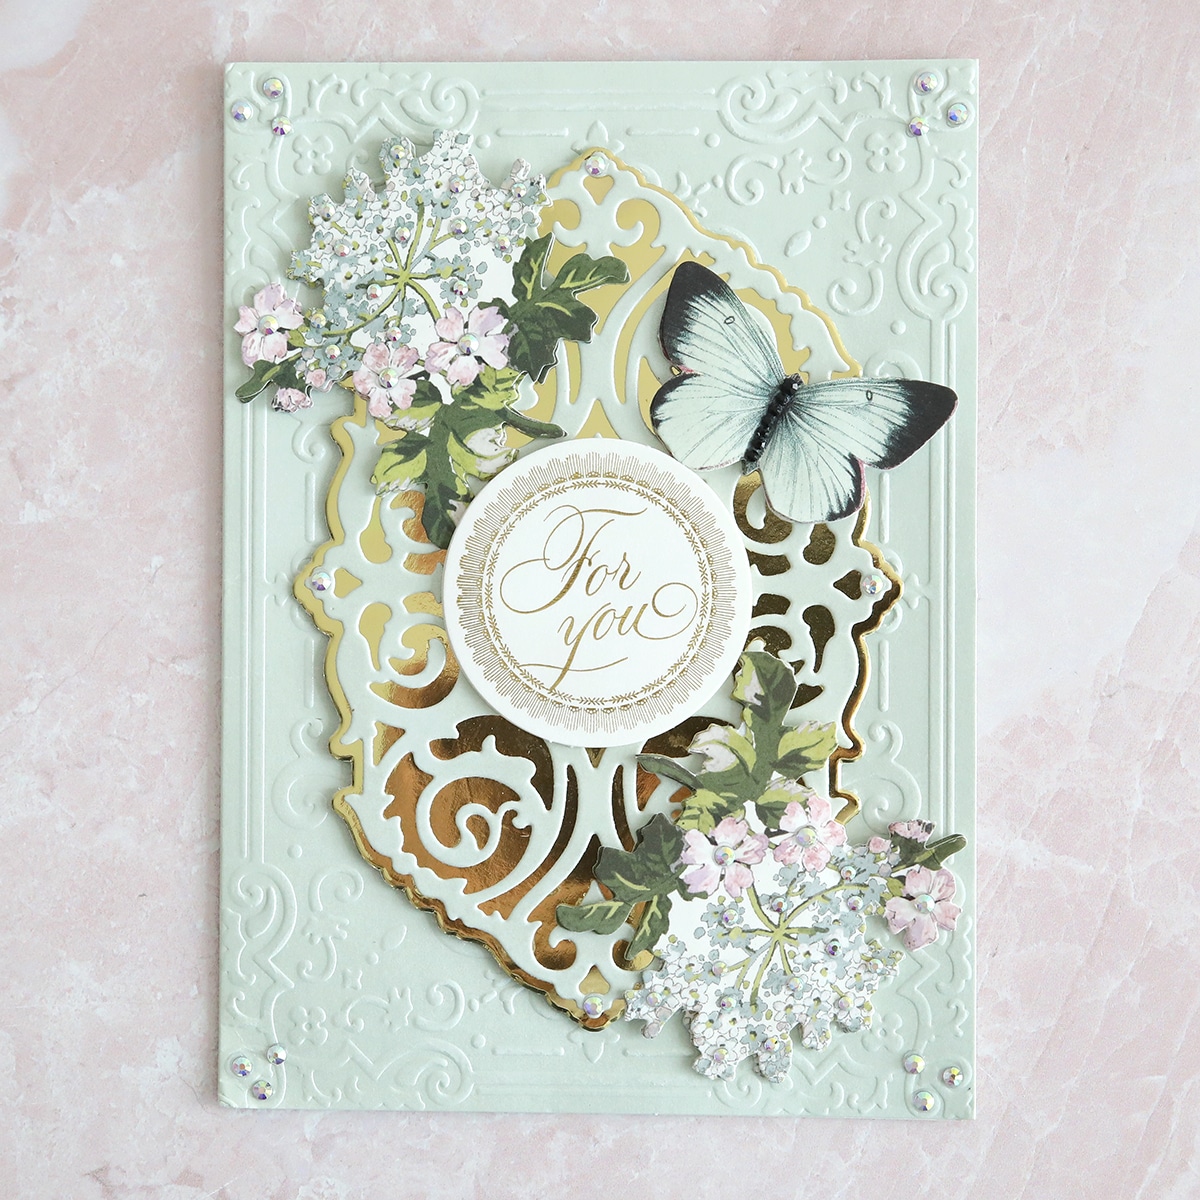 a close up of a card with a butterfly on it.